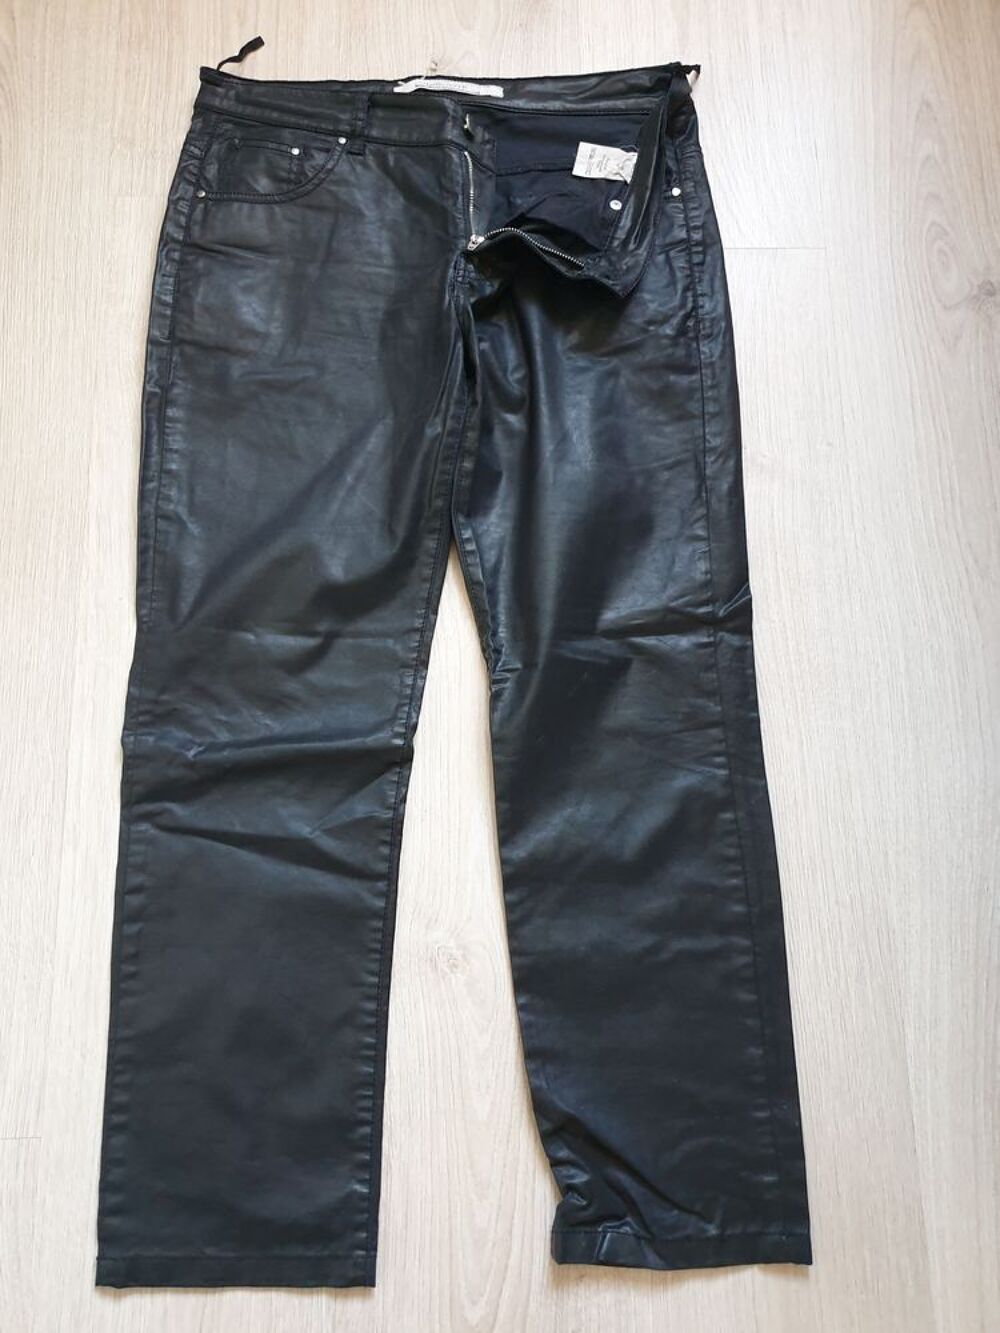 3 Pantalons effet glac&eacute; Biscote taille 42 Vtements